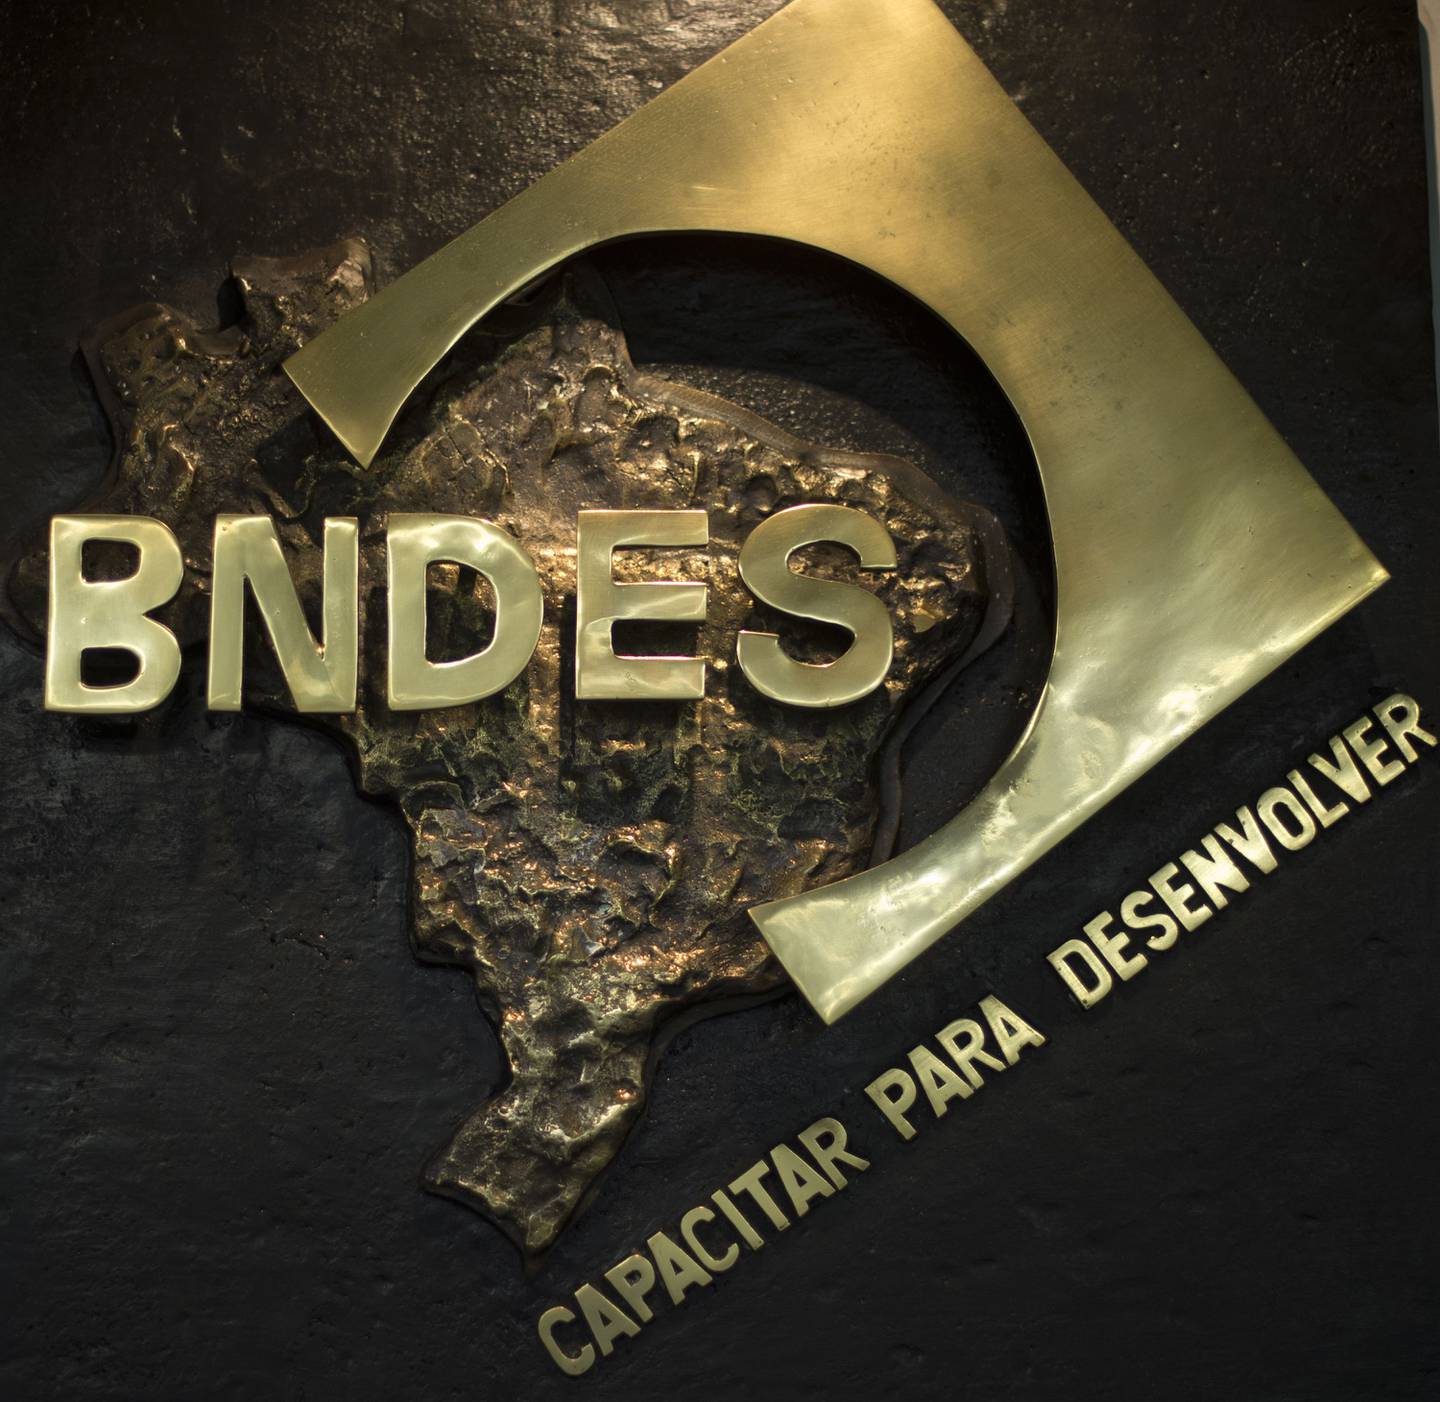 The shrinking of BNDES was a core tenet of the current government, and a reversal of previous policy under Lula and his allies.